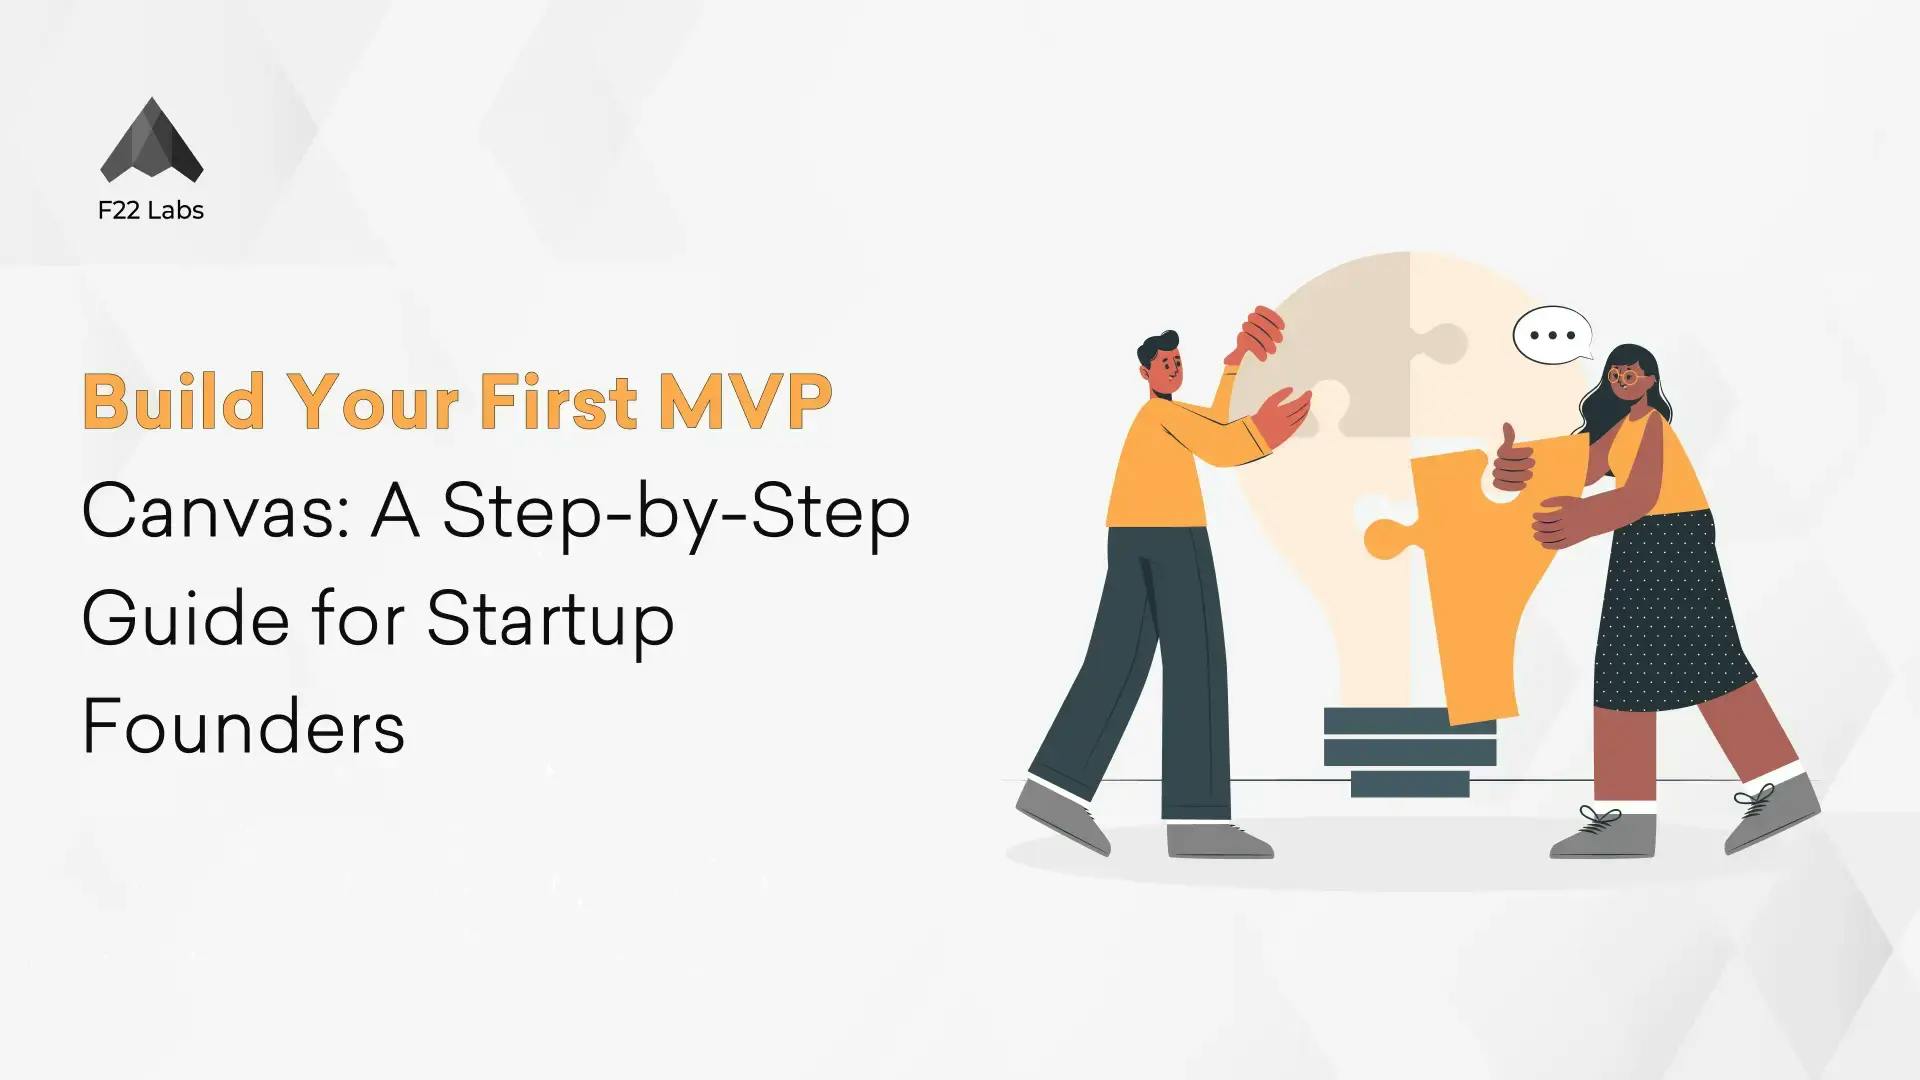 Build Your First MVP Canvas: A Step-by-Step Guide for Startup Founders Hero